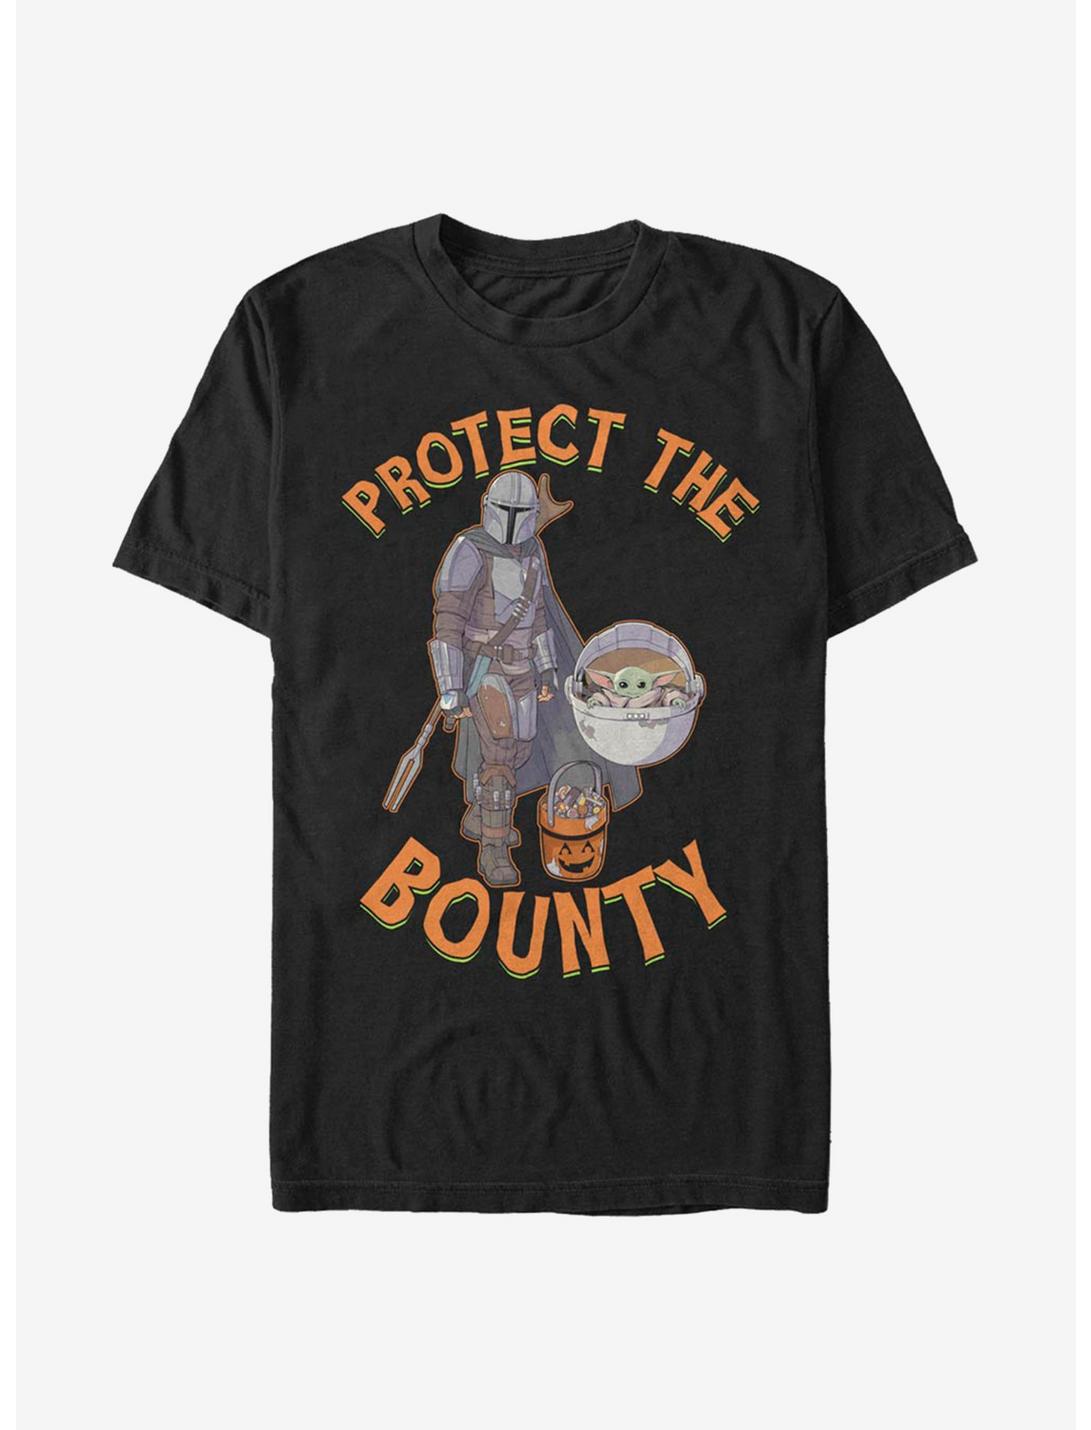 Star Wars The Mandalorian The Child Protect Bounty Halloween T-Shirt, CHARCOAL, hi-res